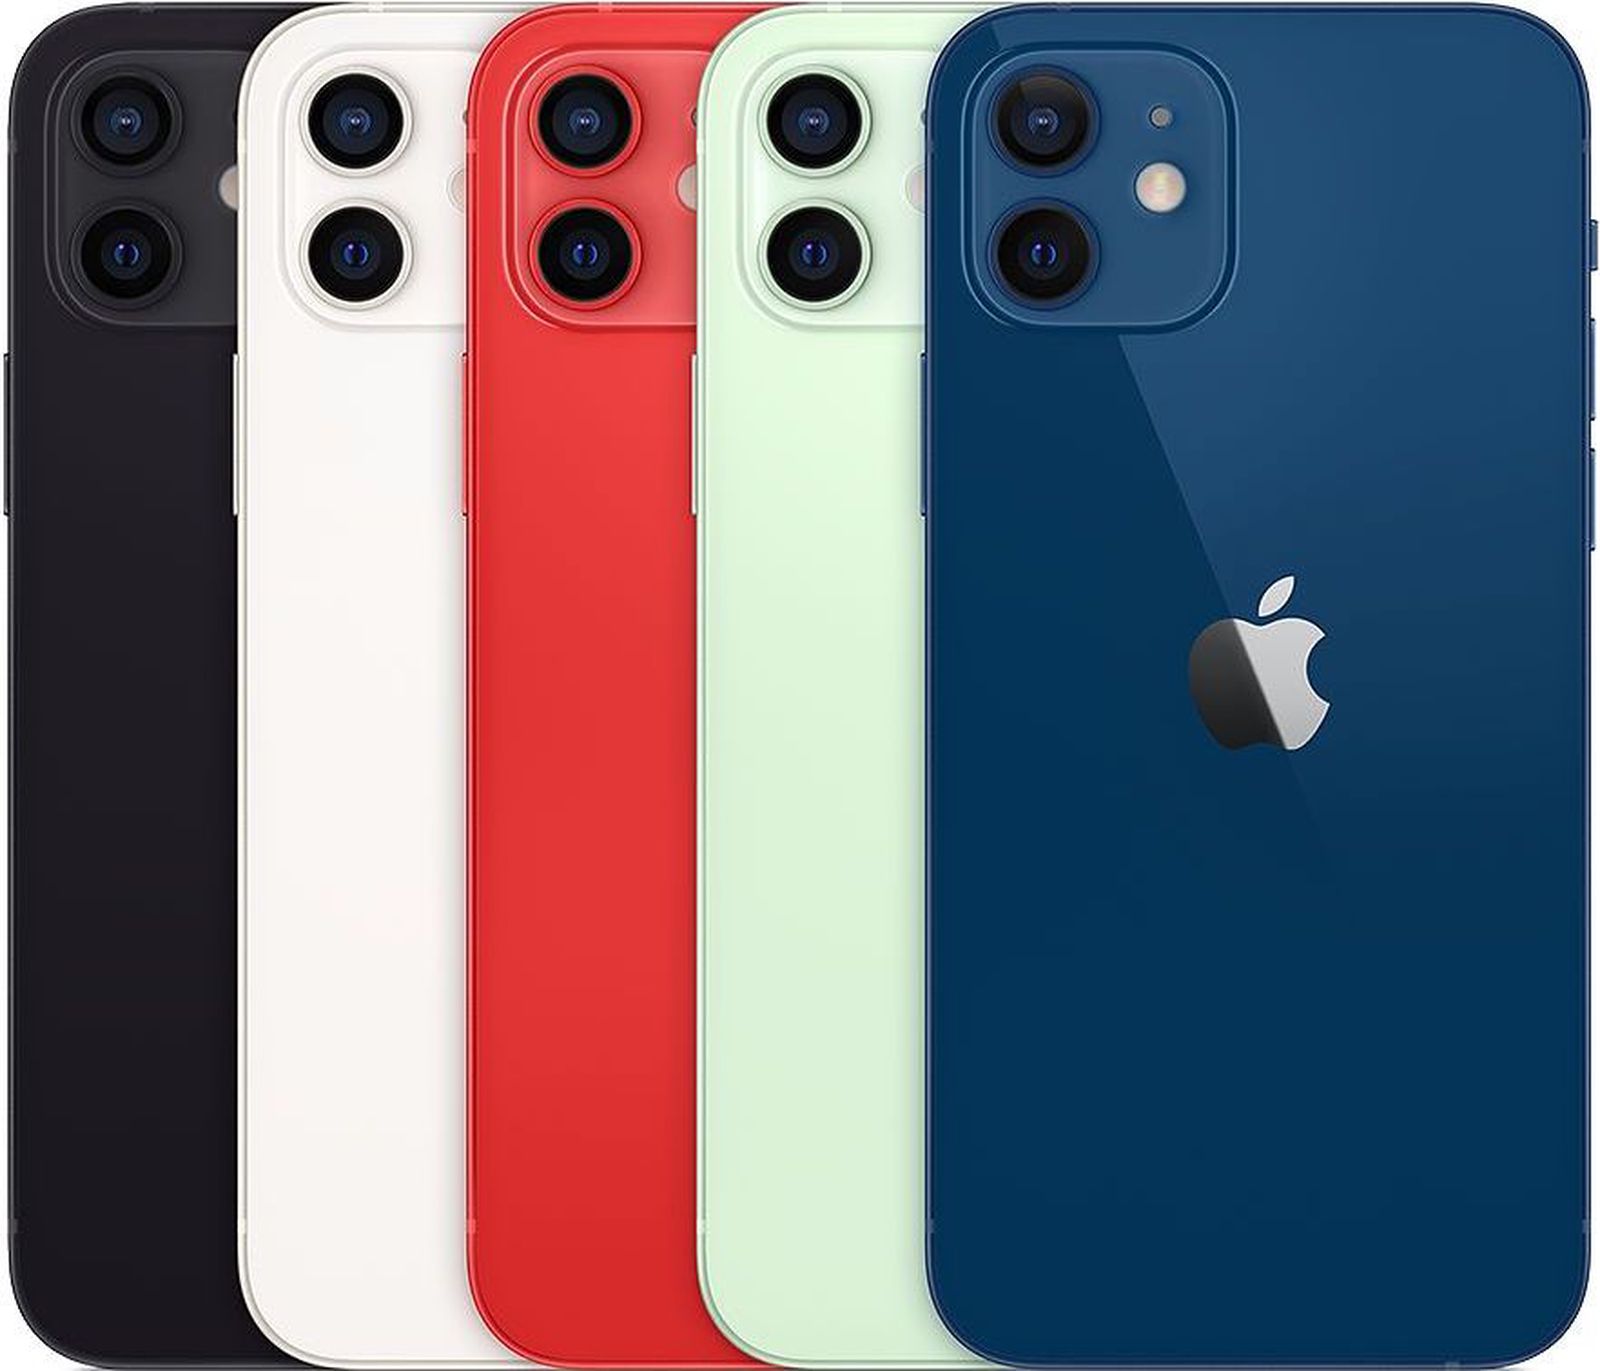 iphone12 colors pro max